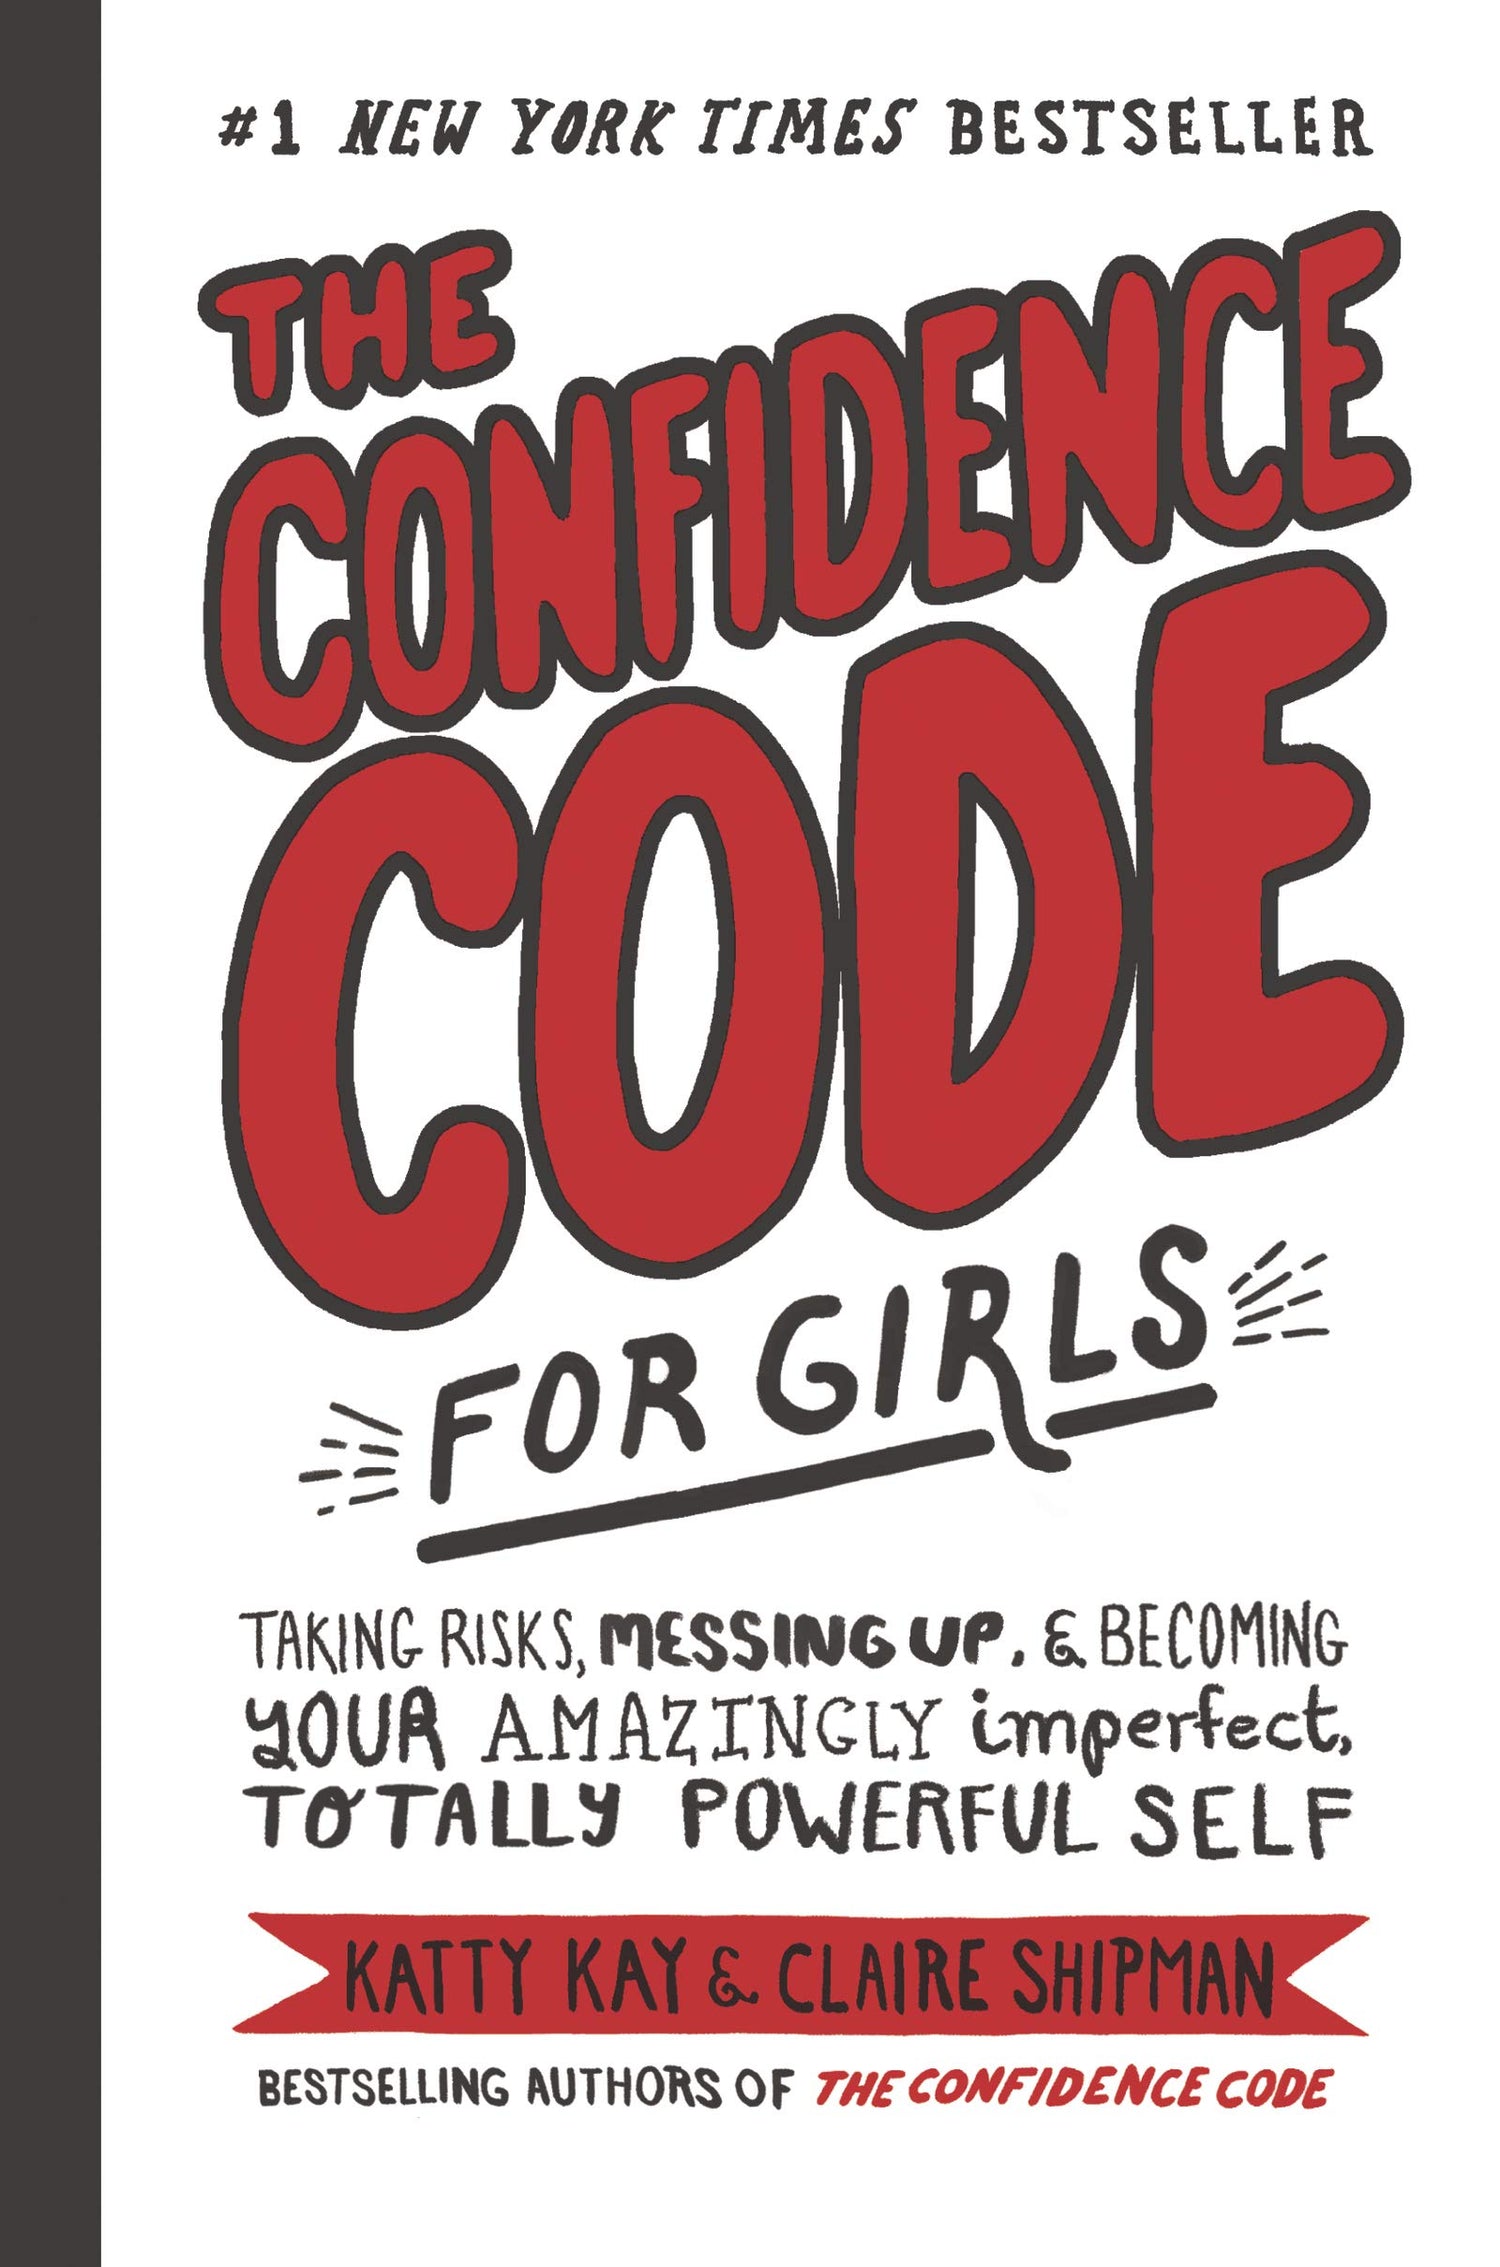 The Confidence Code For Girls Guide: Taking Risks, Messing Up, & Becoming Your Amazingly Imperfect, Totally Powerful Self